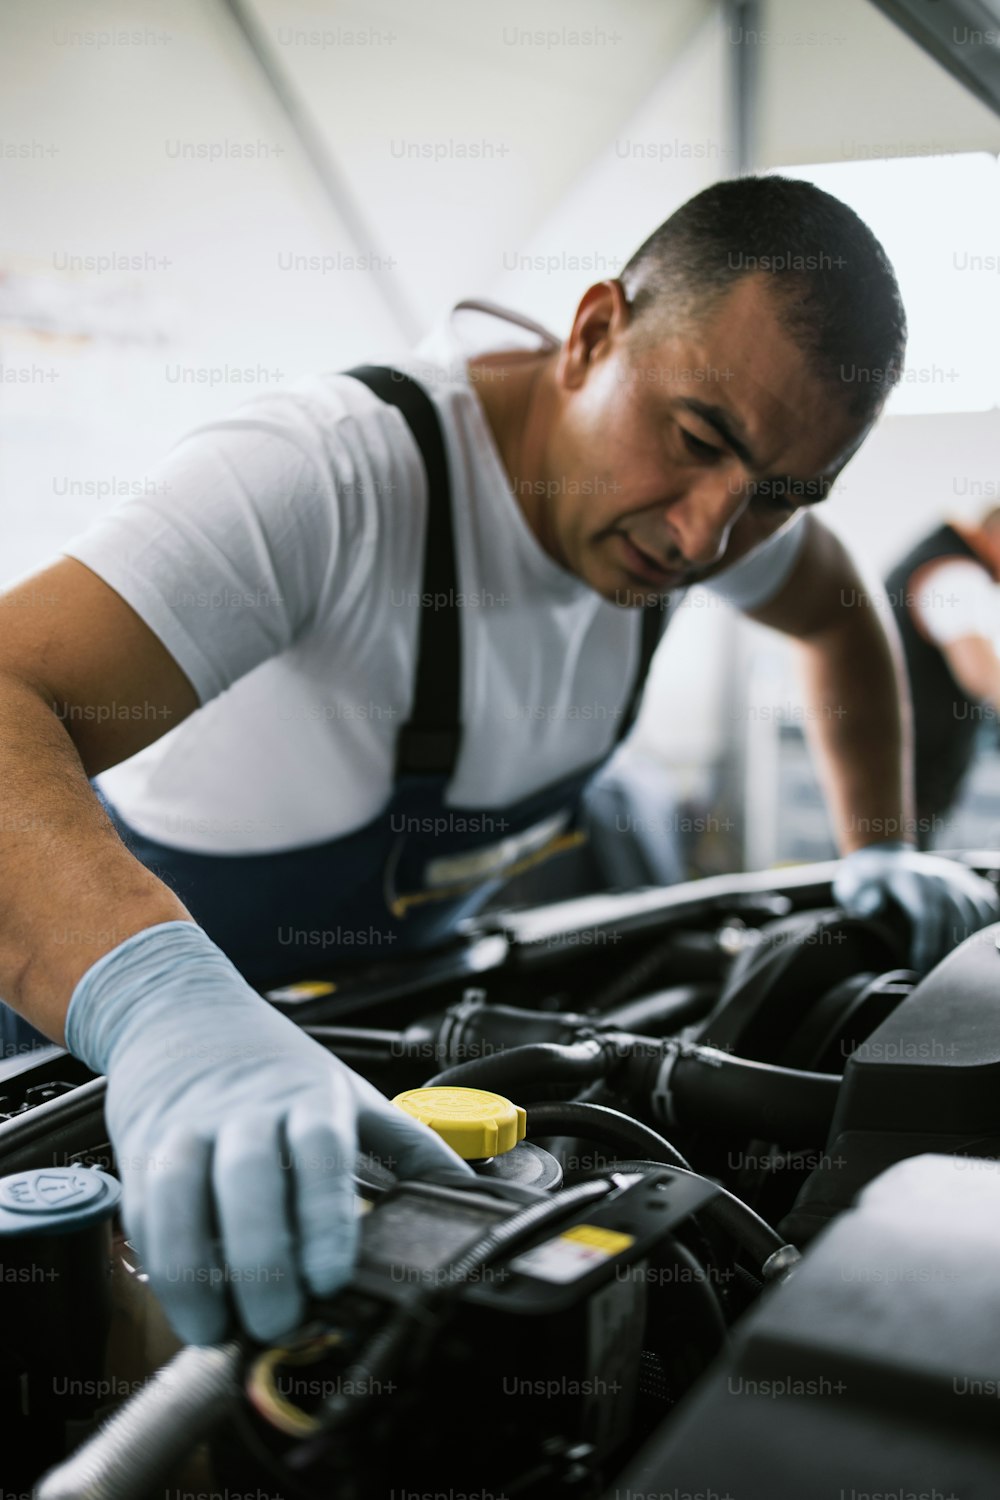 Car service mechanic worker standing in front of car engine open hood and working